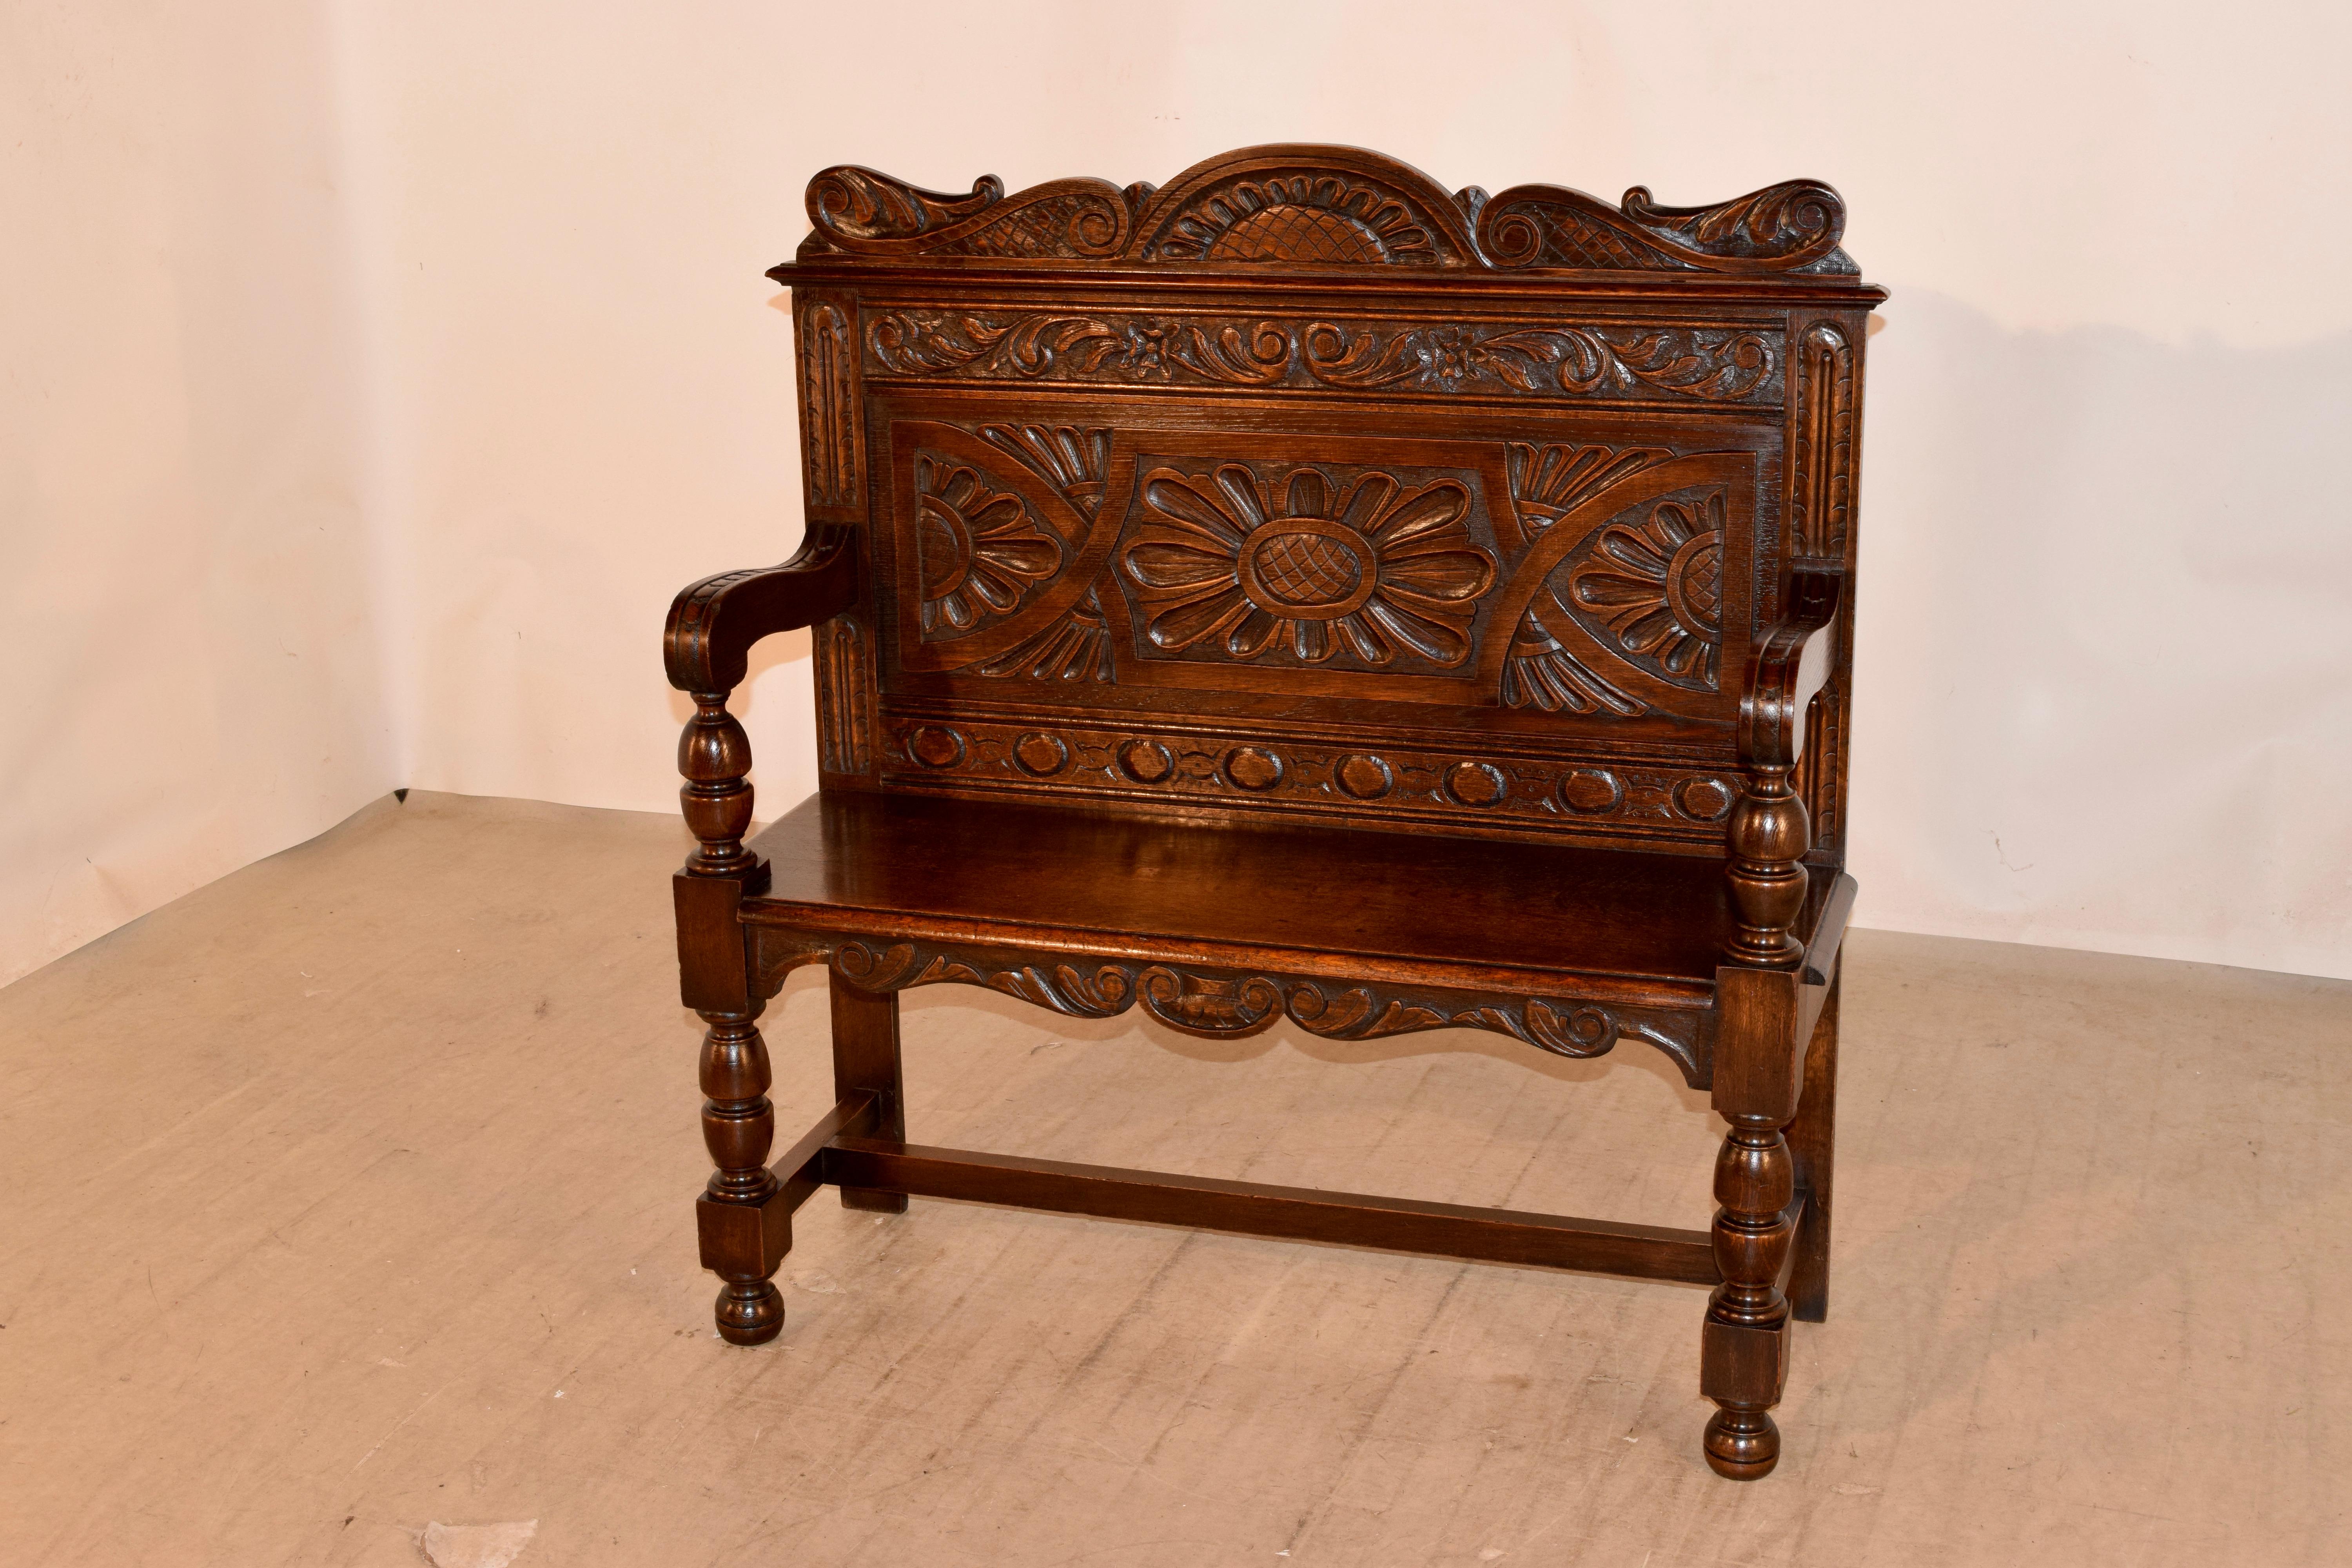 Hand-Carved 19th Century English Settle For Sale